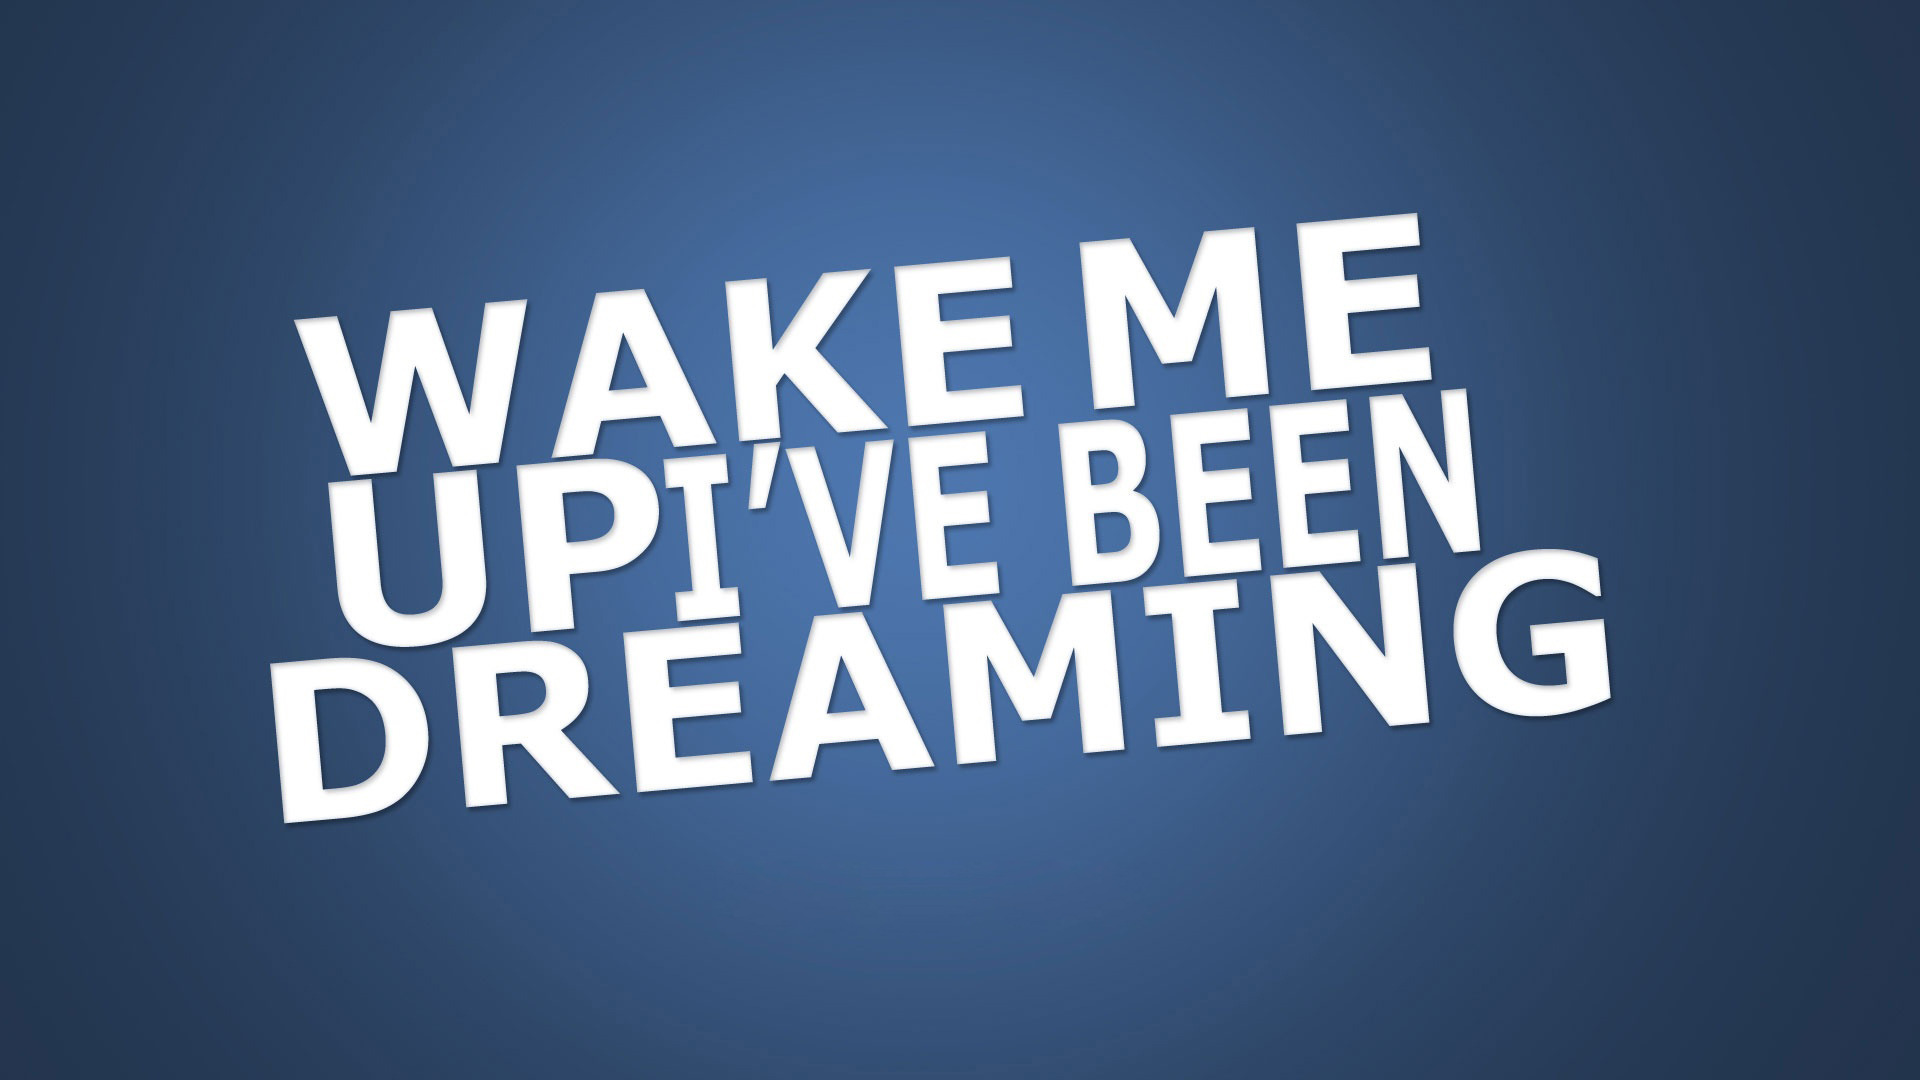 Wake Up Wallpapers  Top Free Wake Up Backgrounds  WallpaperAccess